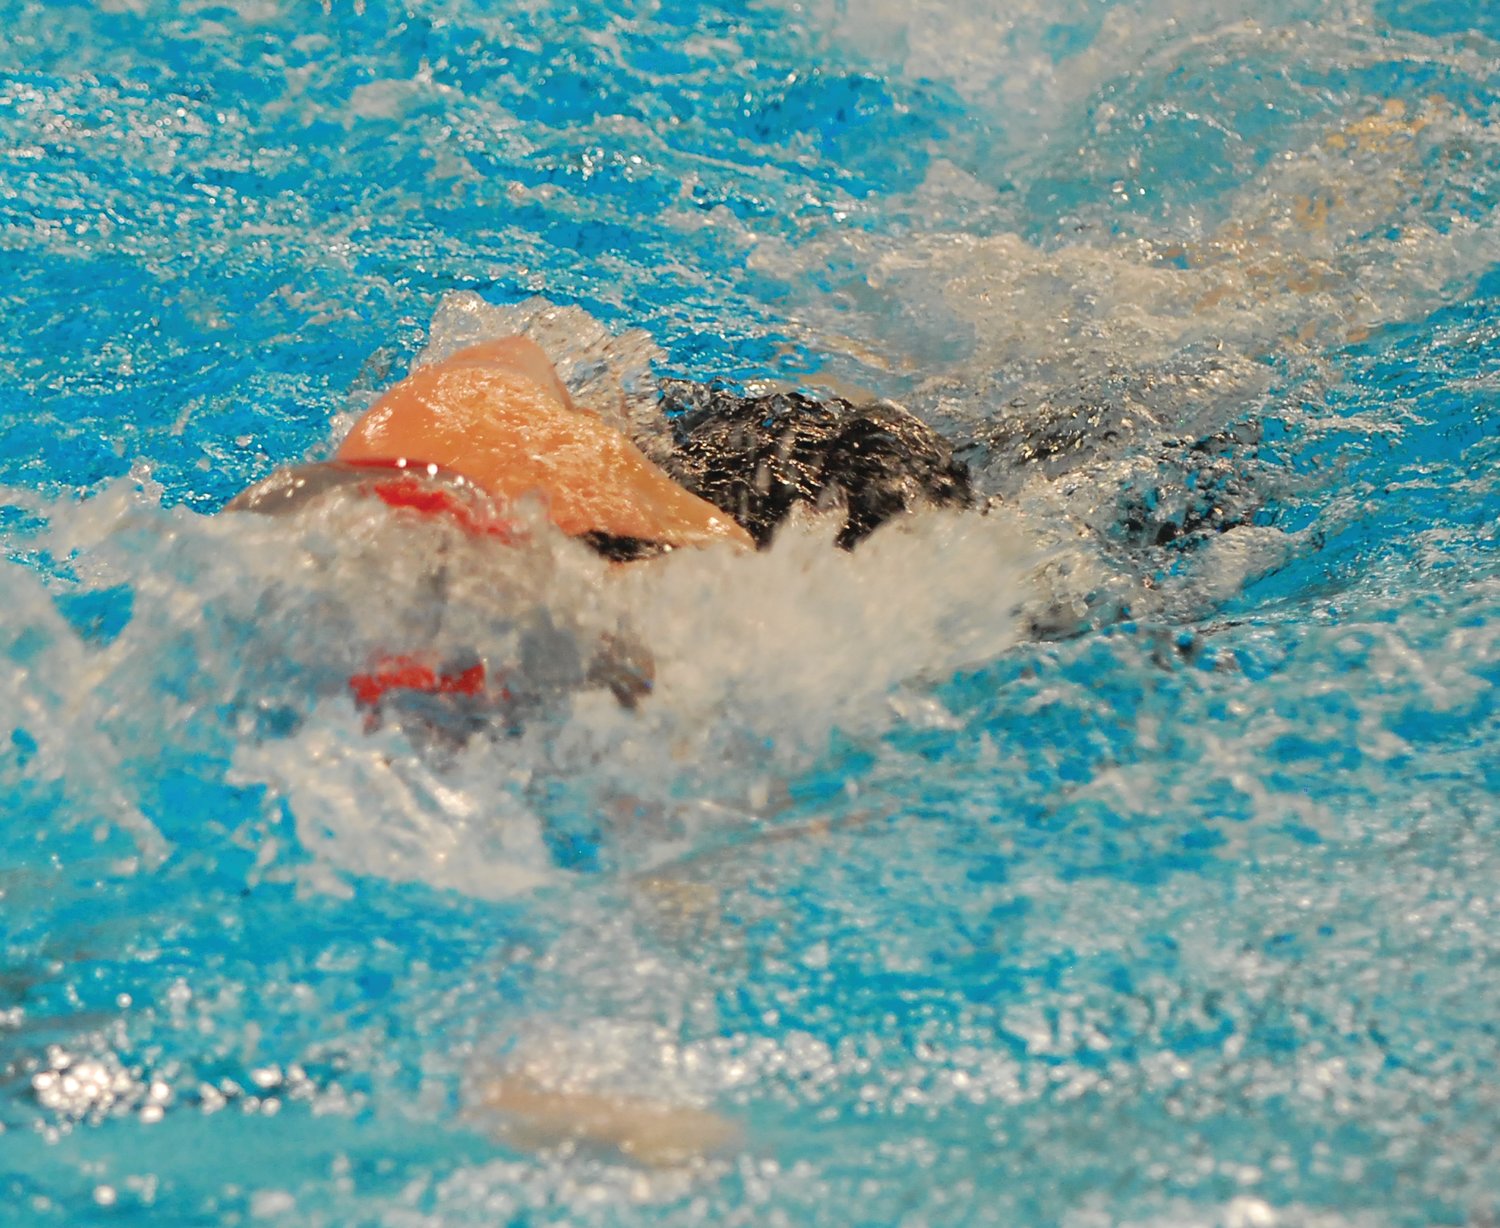 Southmont's Megan Scheidler competes in a meet earlier this season. The senior is seeded first in the 500 freestyle and second in the 200 freestyle.